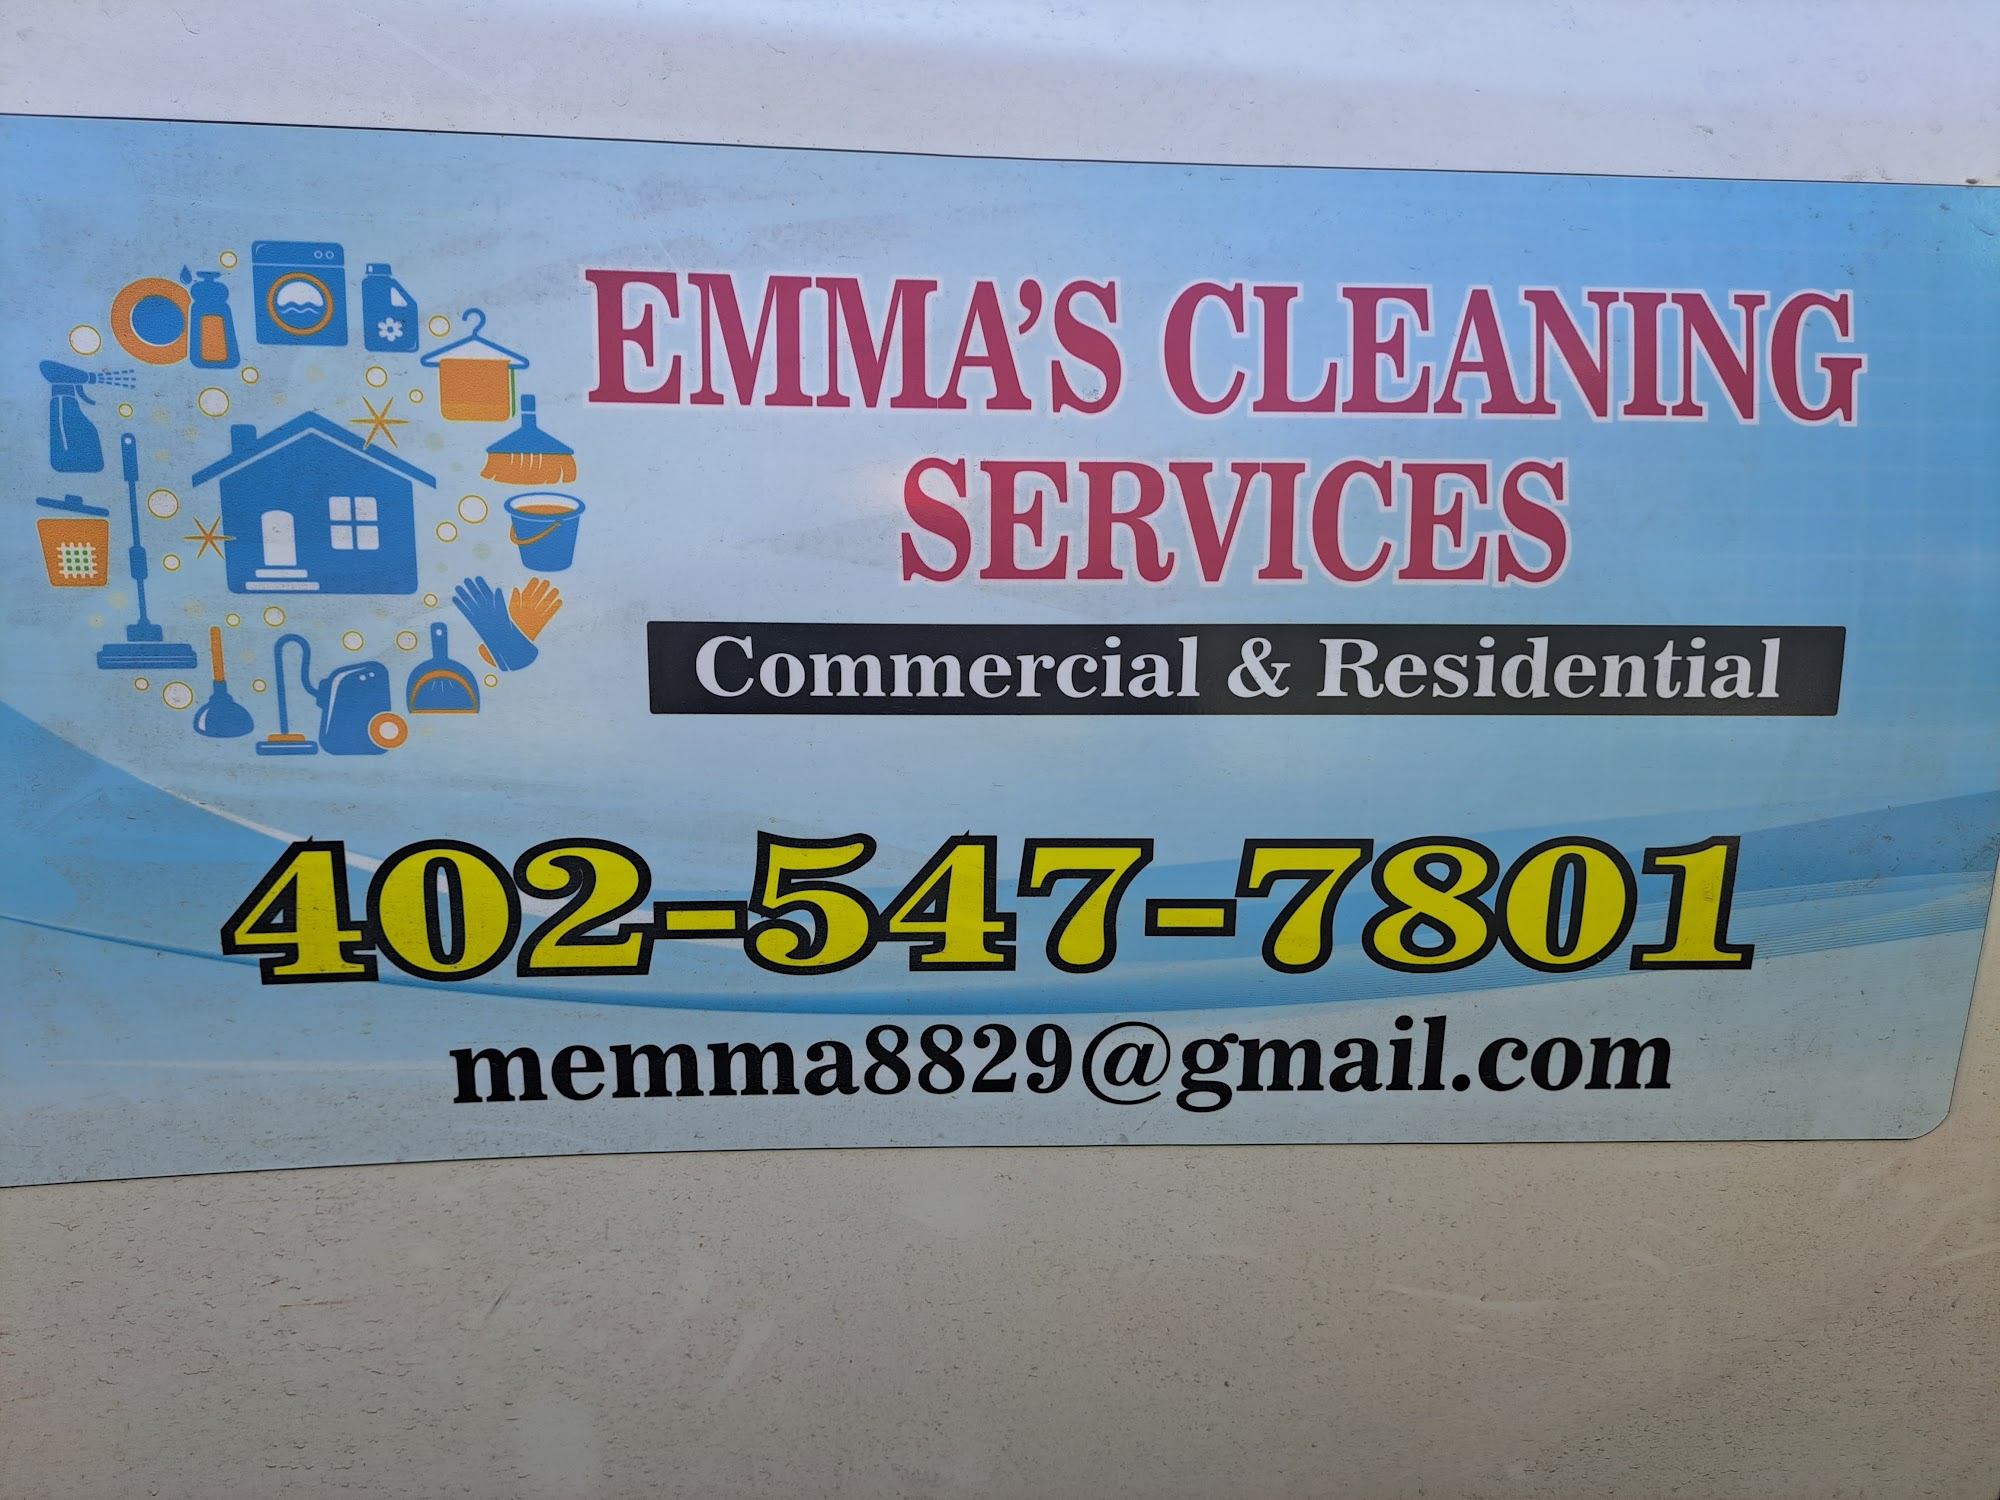 Emma's Cleaning Services